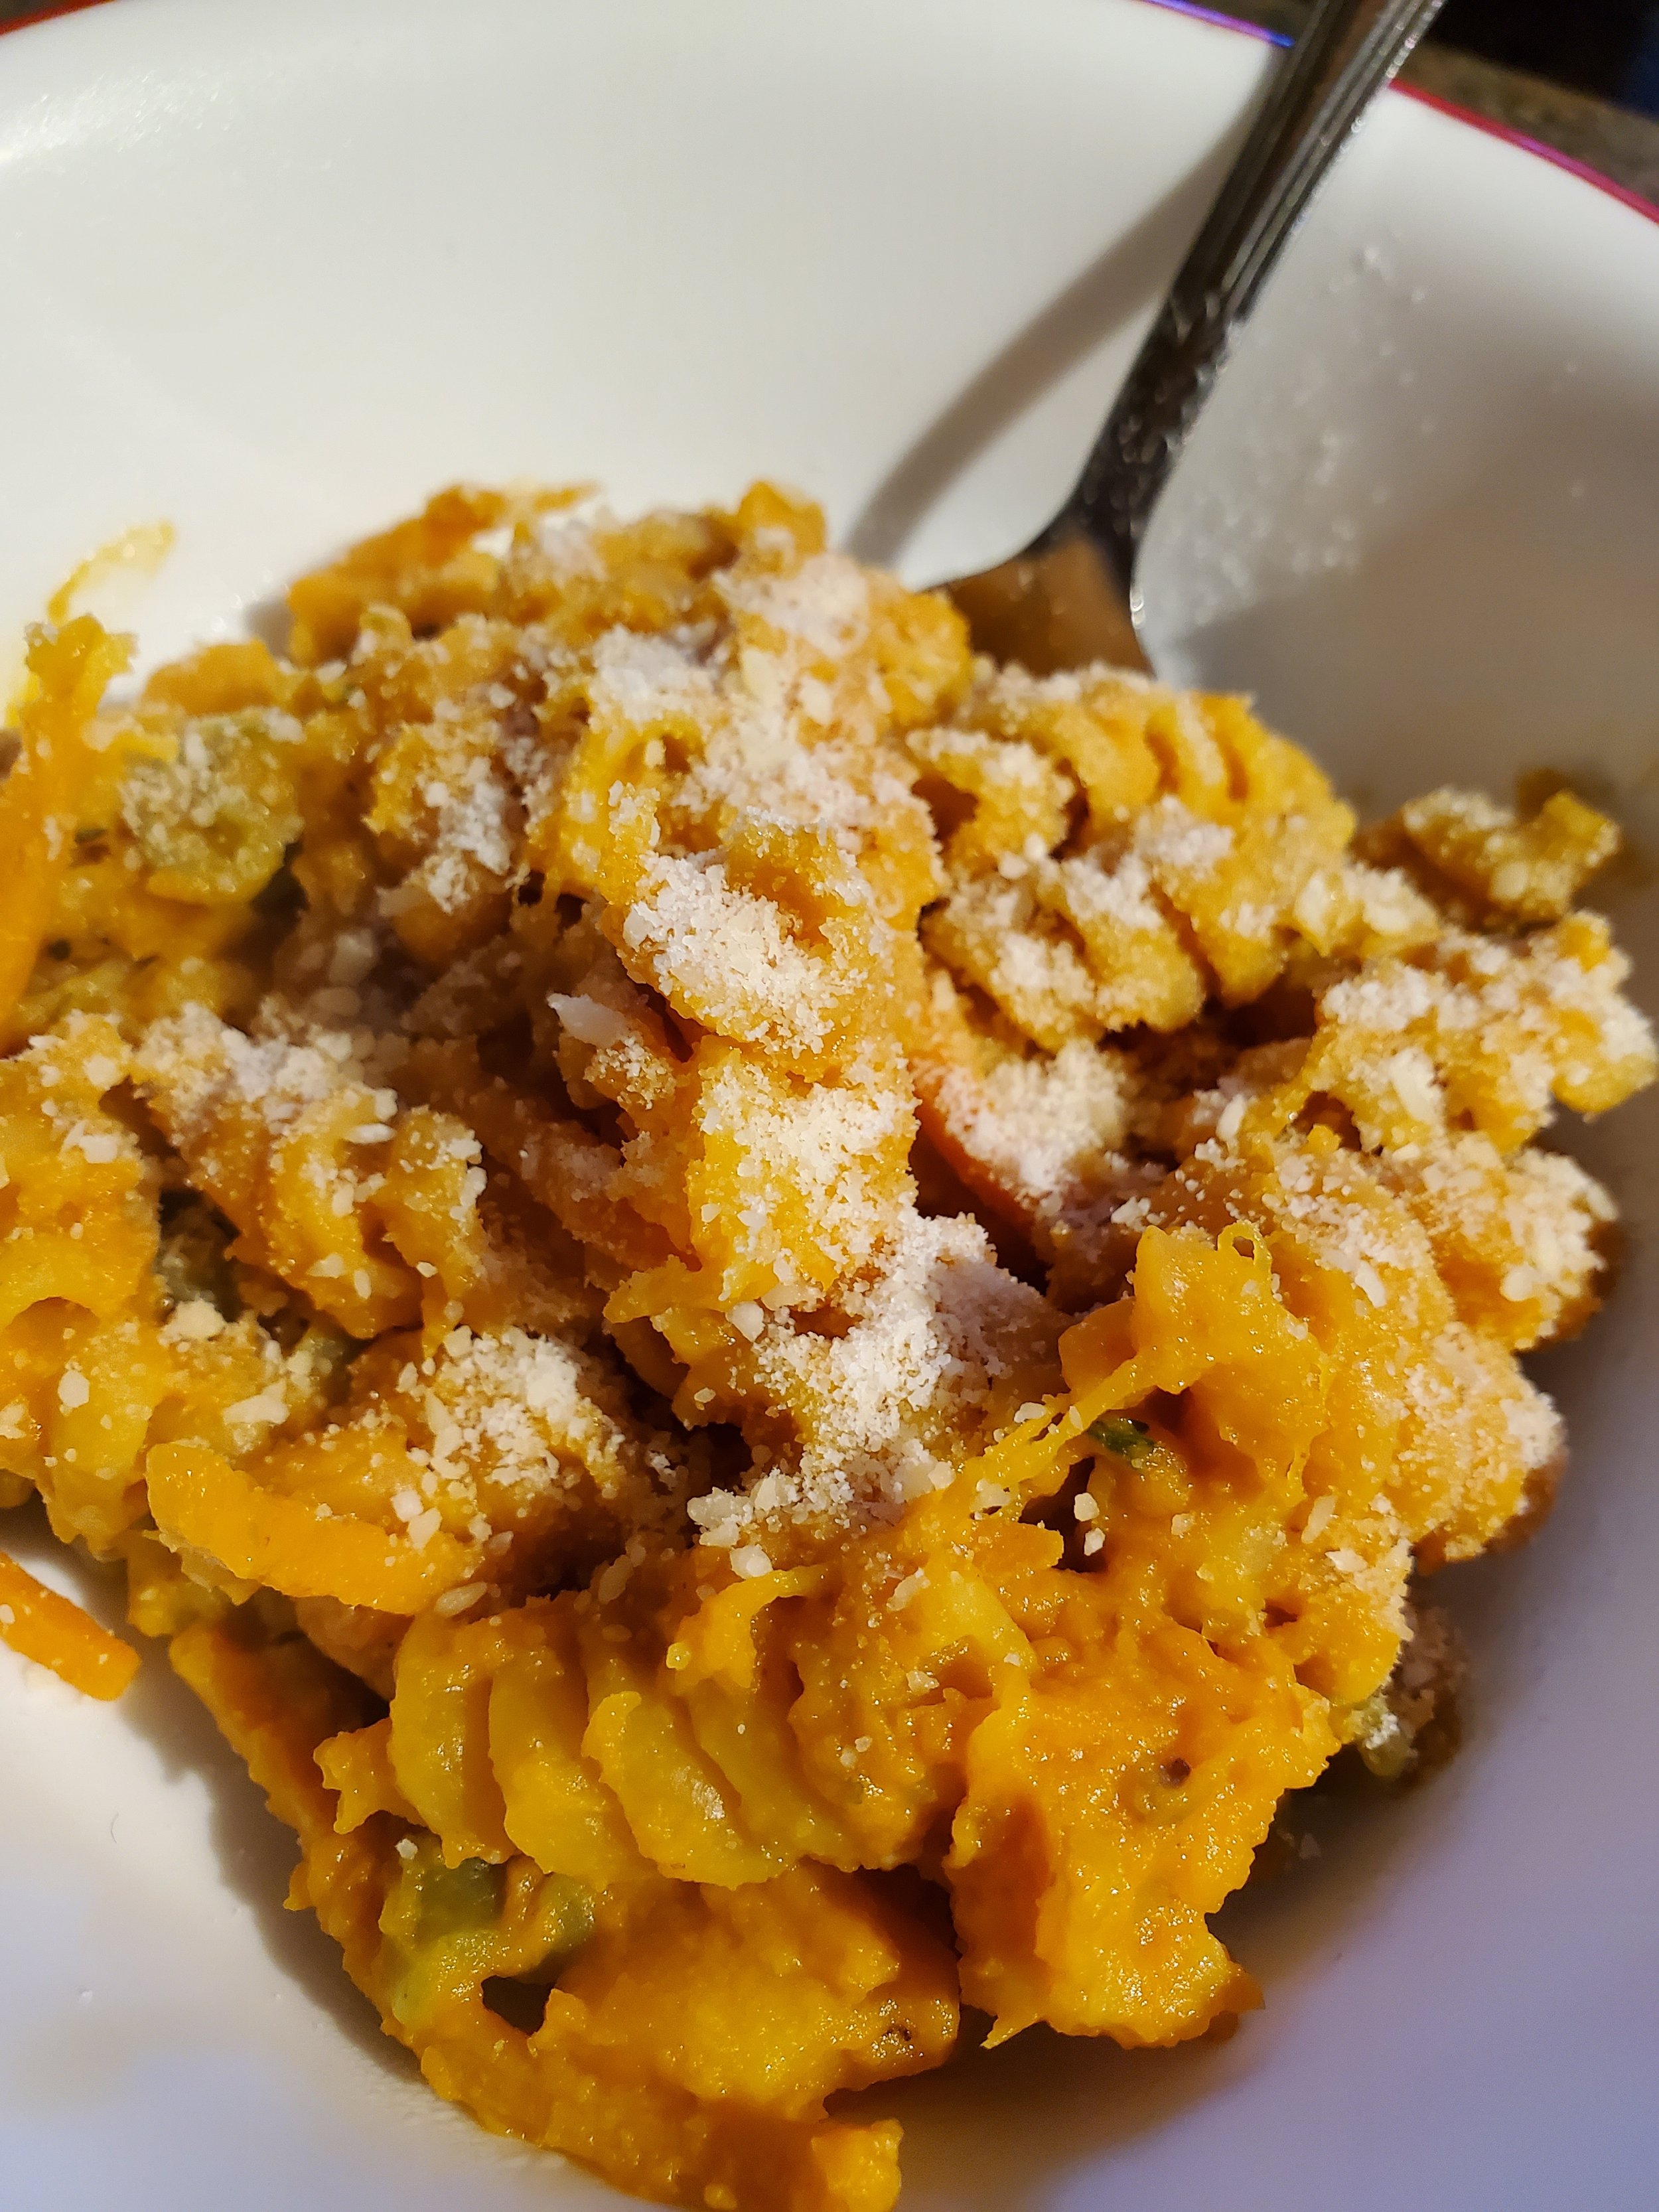 Time to plate and enjoy your amazing pumpkin pasta!.jpg